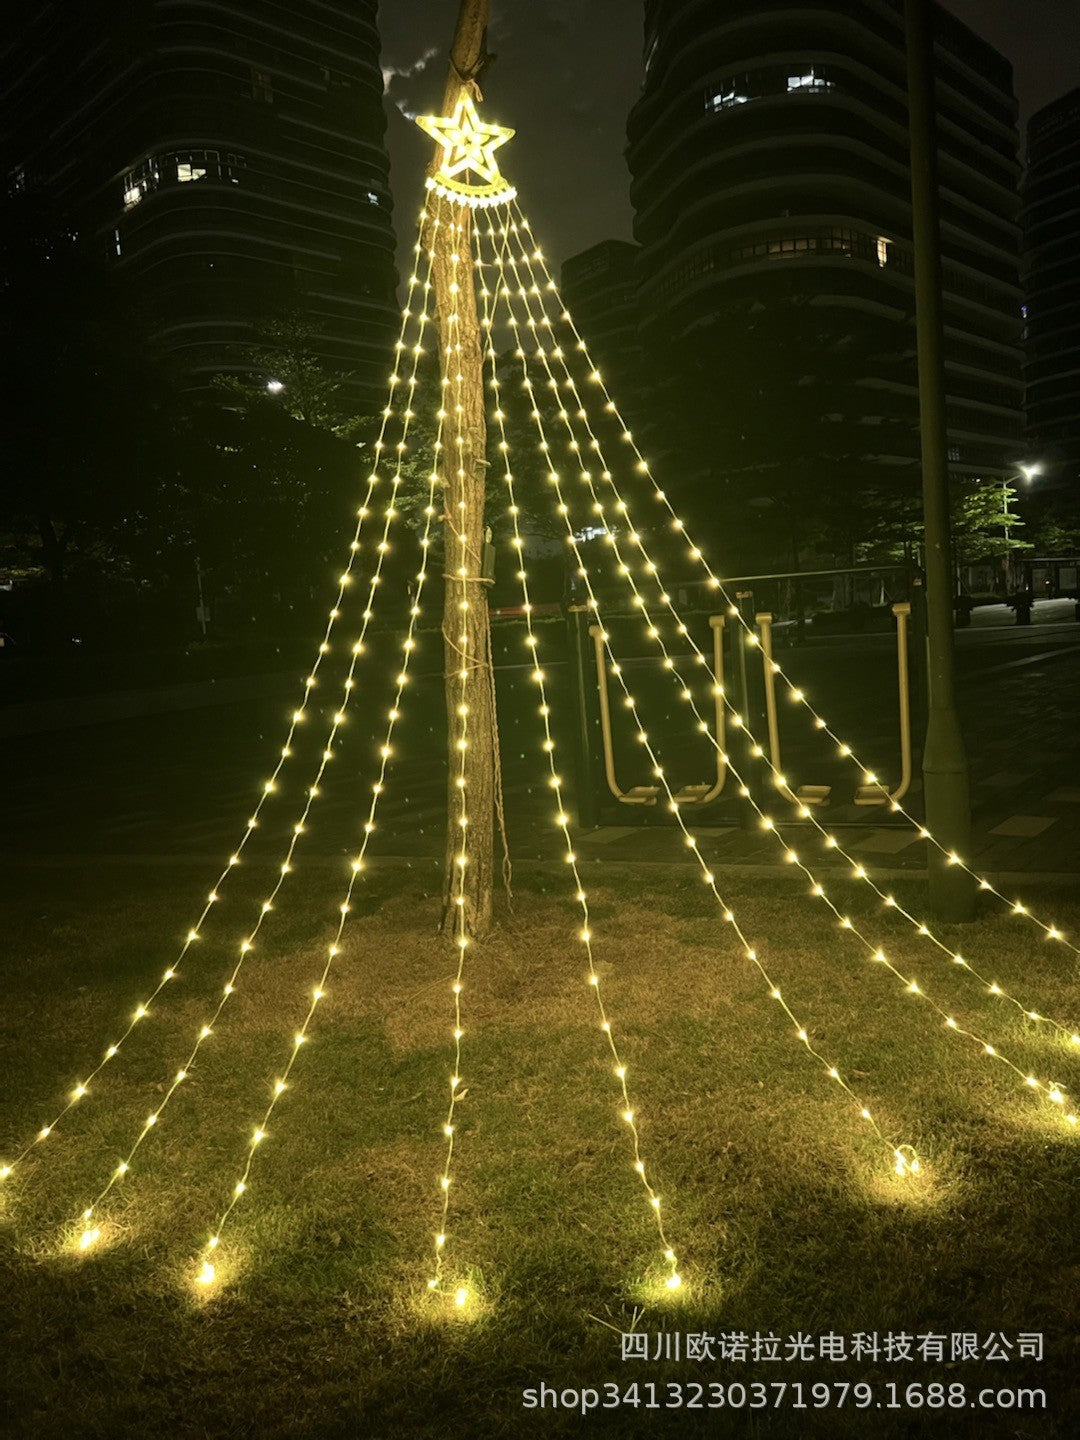 LED five-pointed star waterfall lights flowing water lights lanterns Christmas decoration hanging tree string lights